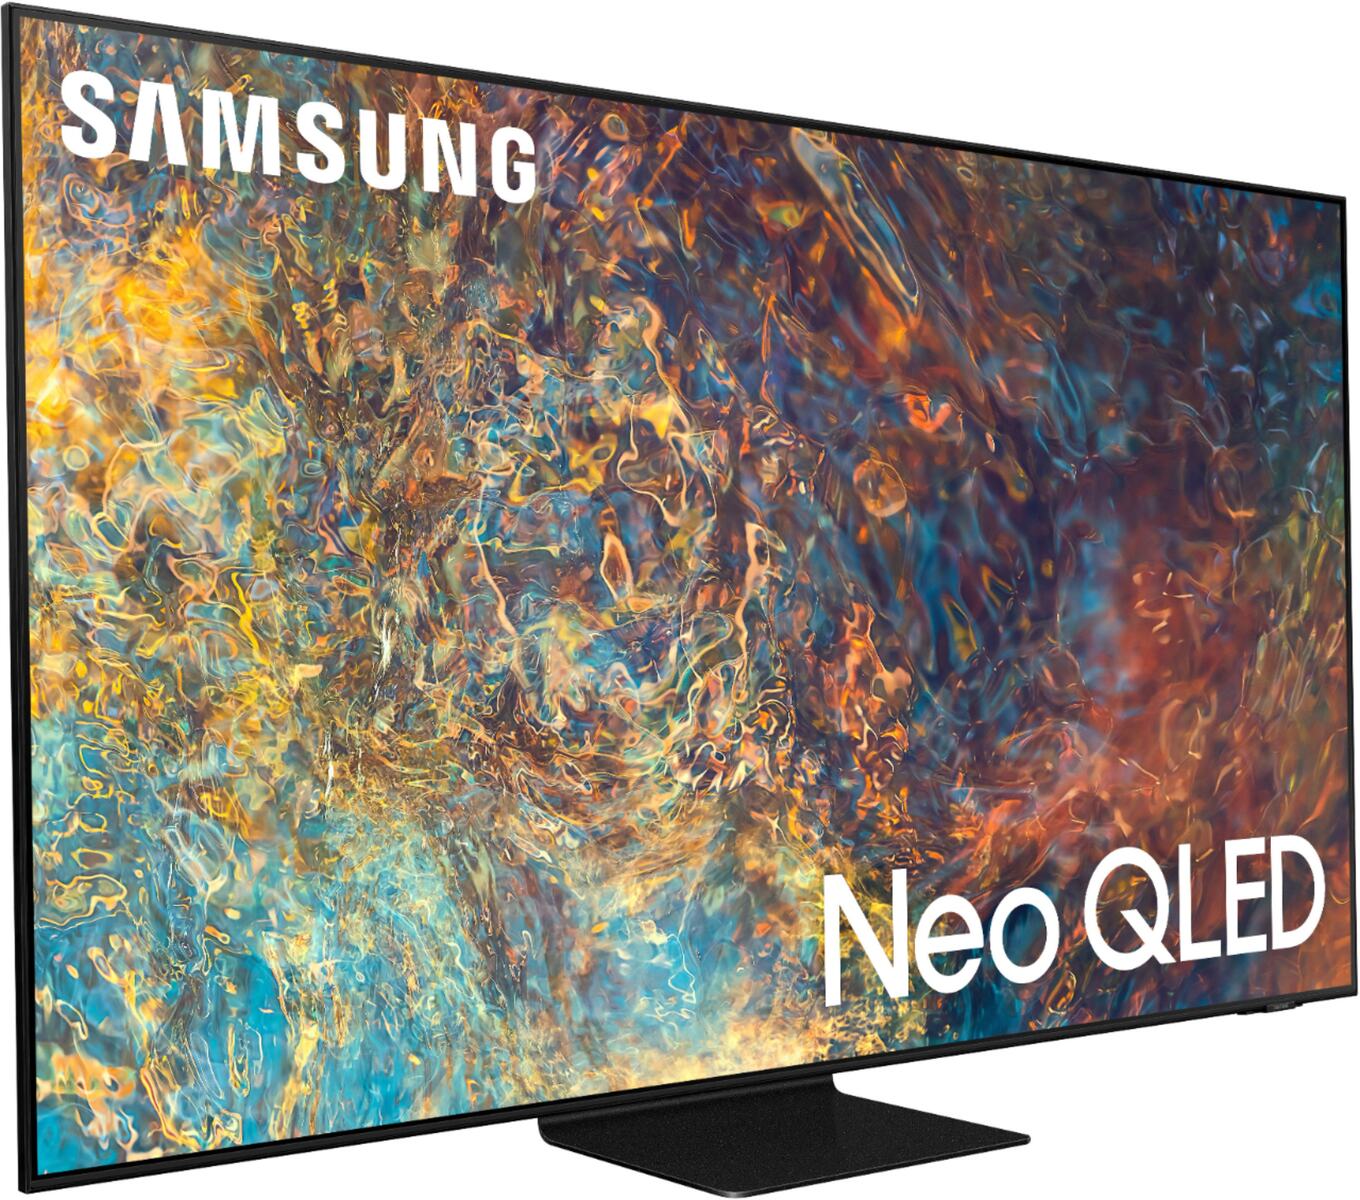 How To Calibrate A Samsung QLED TV